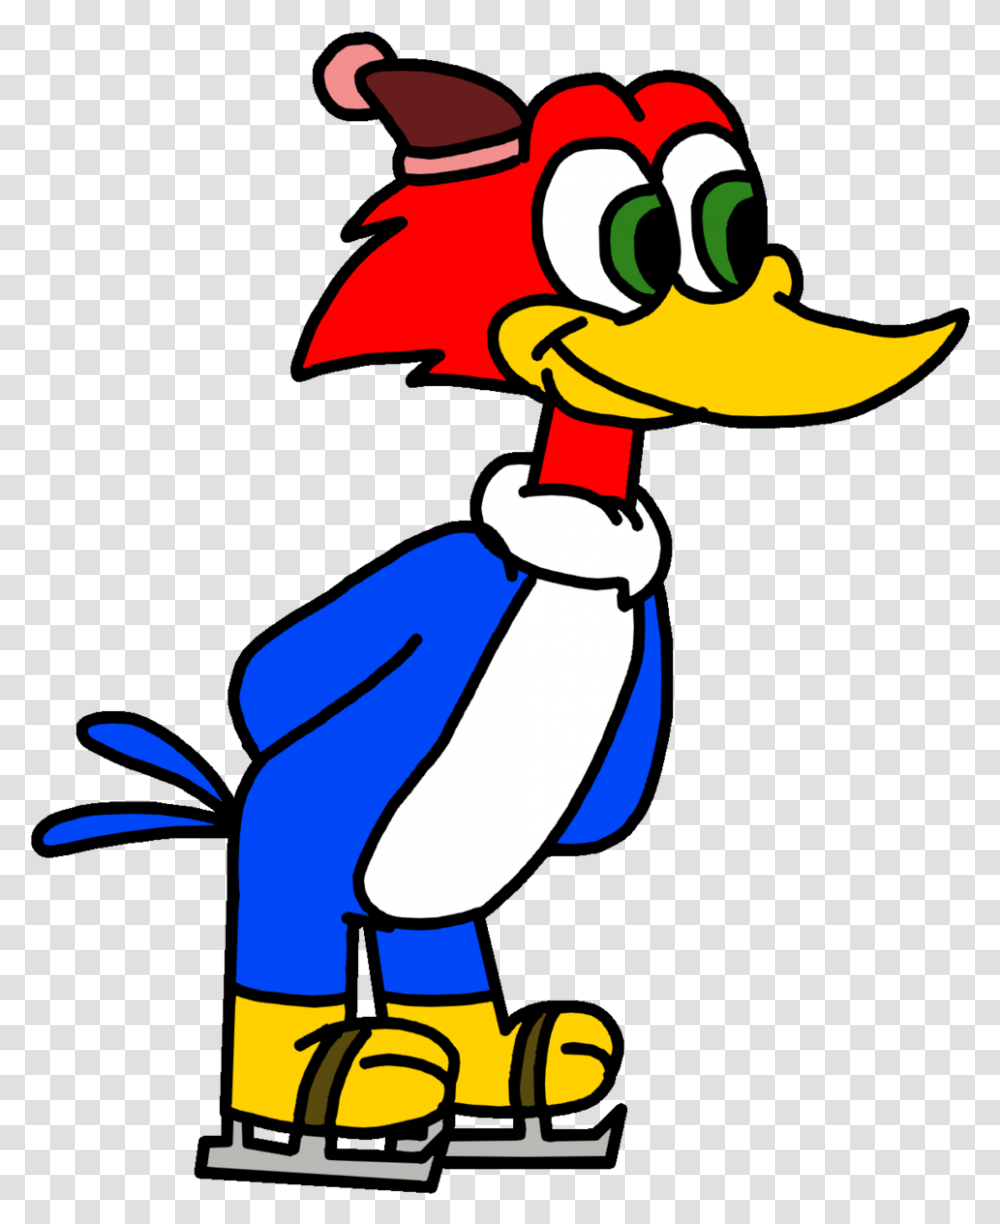 Woody Woodpecker Doing Ice Skating By Marcospower1996 Duck, Light, Flame Transparent Png